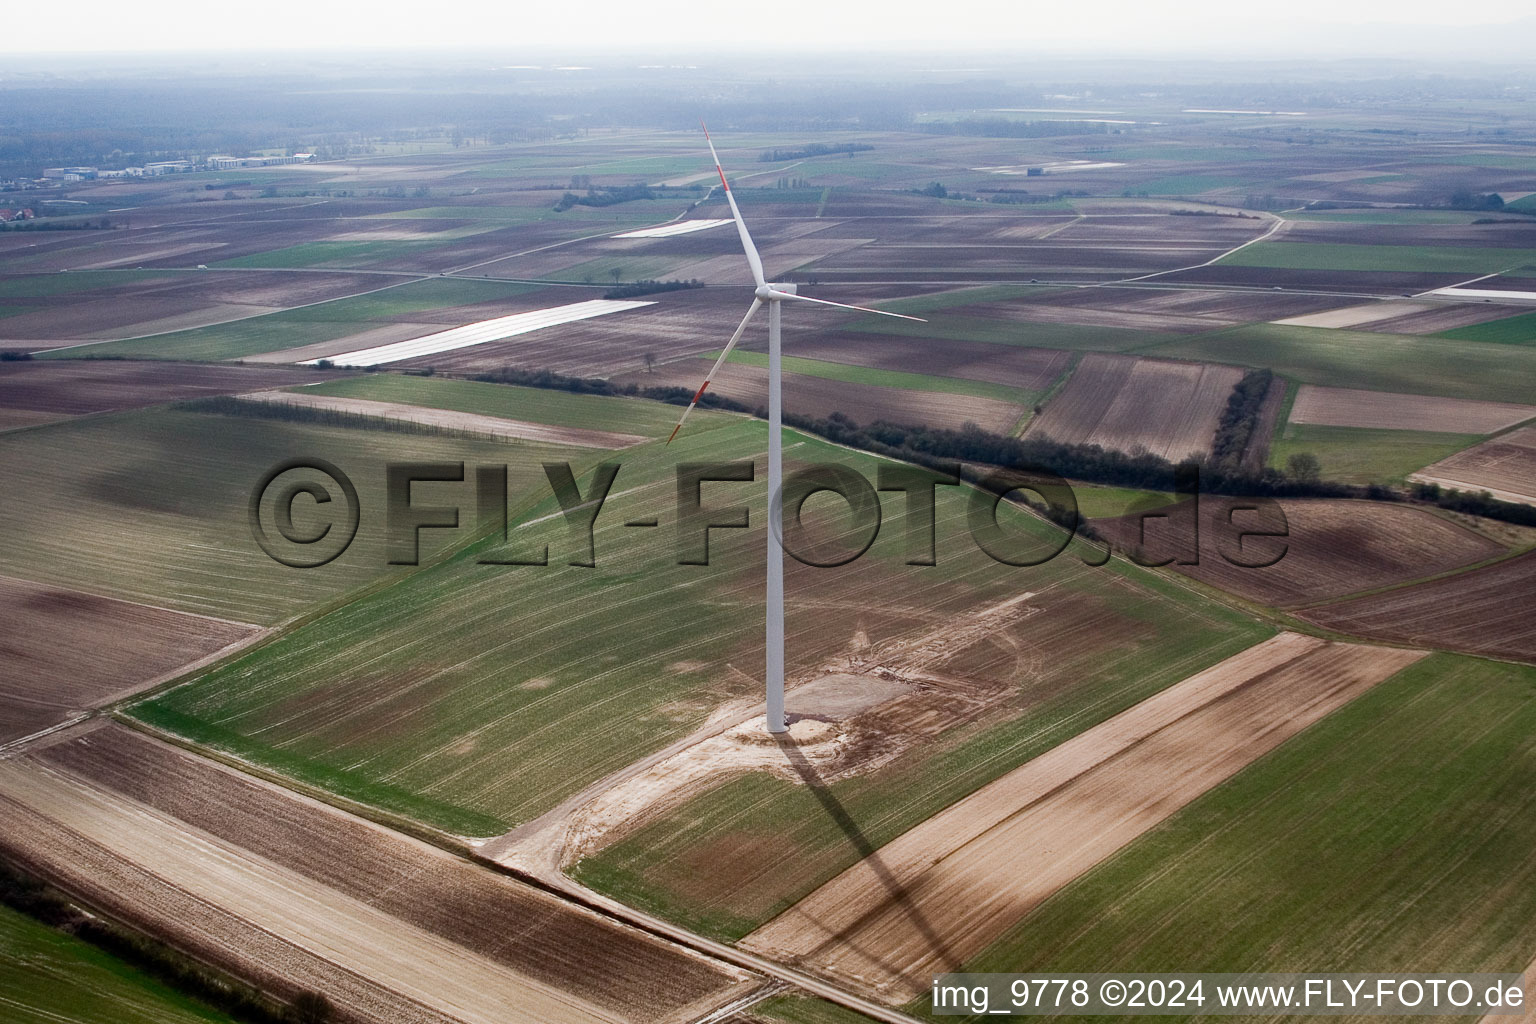 Bird's eye view of Wind turbines in Offenbach an der Queich in the state Rhineland-Palatinate, Germany